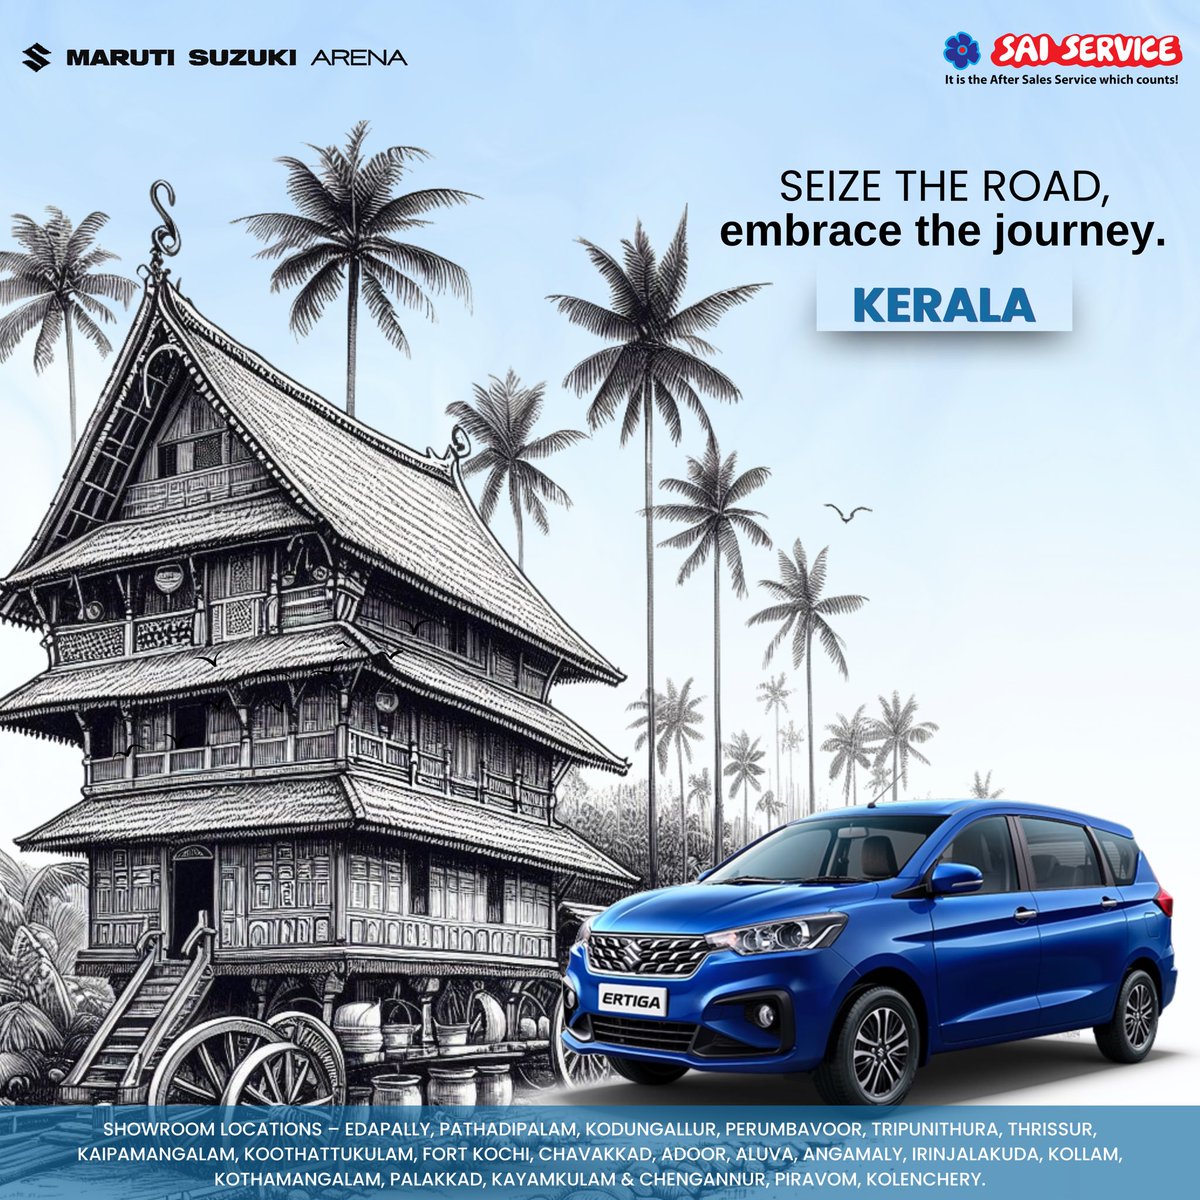 Every journey is an adventure when you drive with us. Visit your nearest Sai Service Arena showroom in Kerala today. To learn more about us click on saiservice.com. #saiservices #saiserviceindia #newcar #automotive #nexa #arena #marutisuzuki #suzuki #drivemode #drive